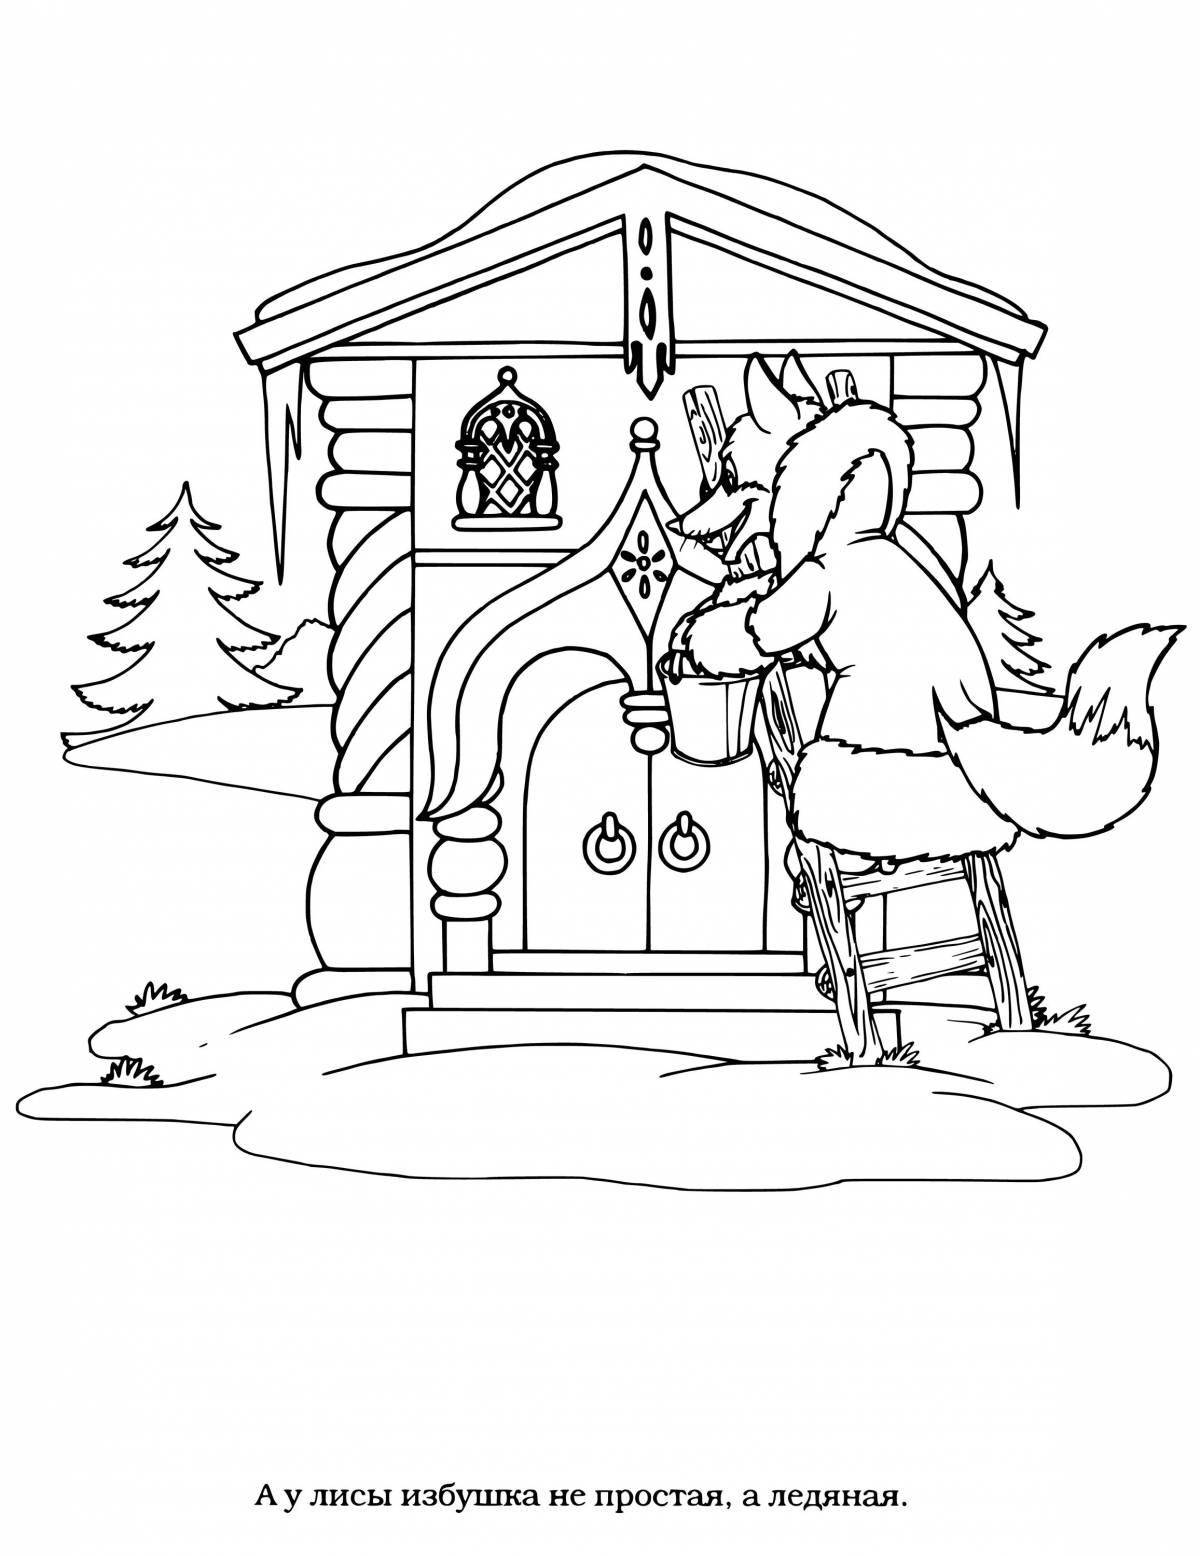 Radiant washcloth and ice hut coloring page